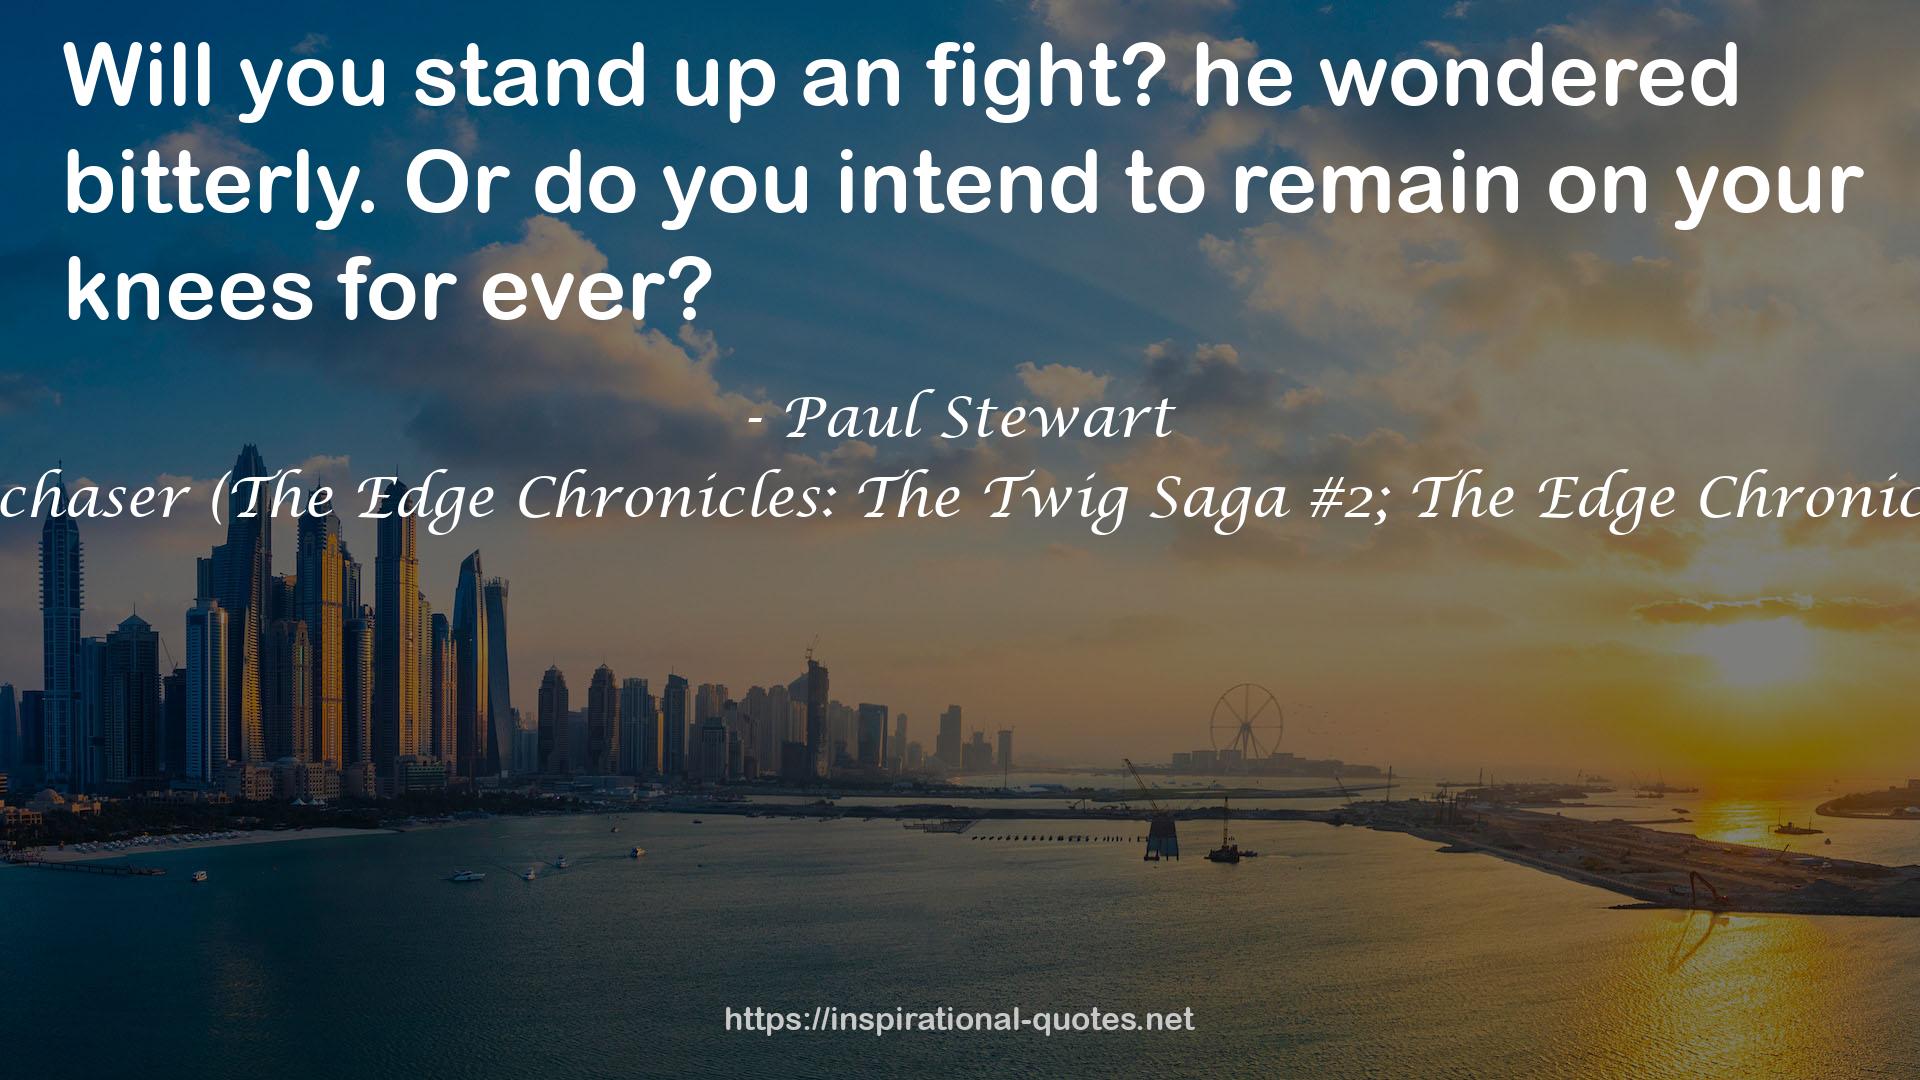 Stormchaser (The Edge Chronicles: The Twig Saga #2; The Edge Chronicles #5) QUOTES